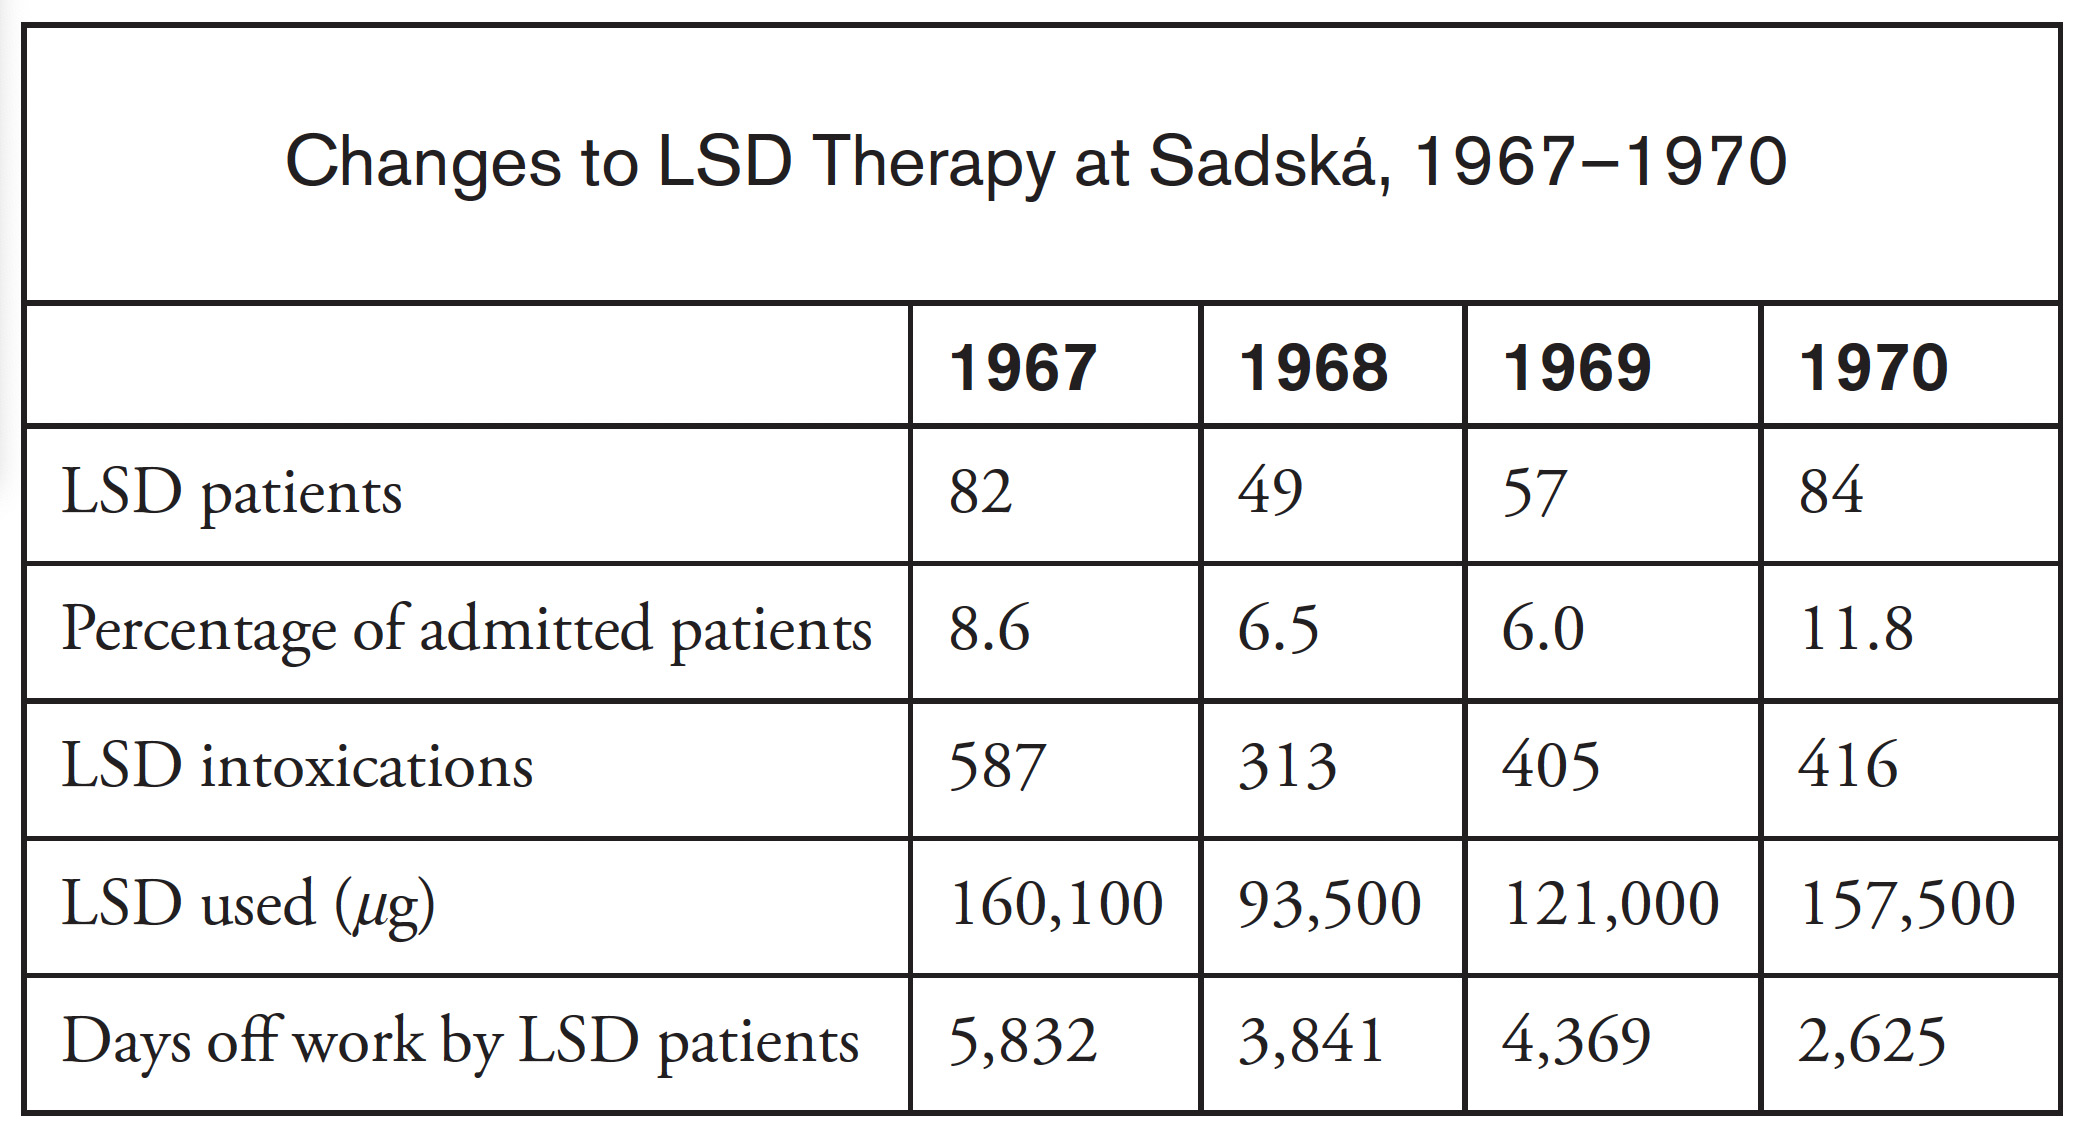 Changes to lsd therapy at saskatoon, 1970.